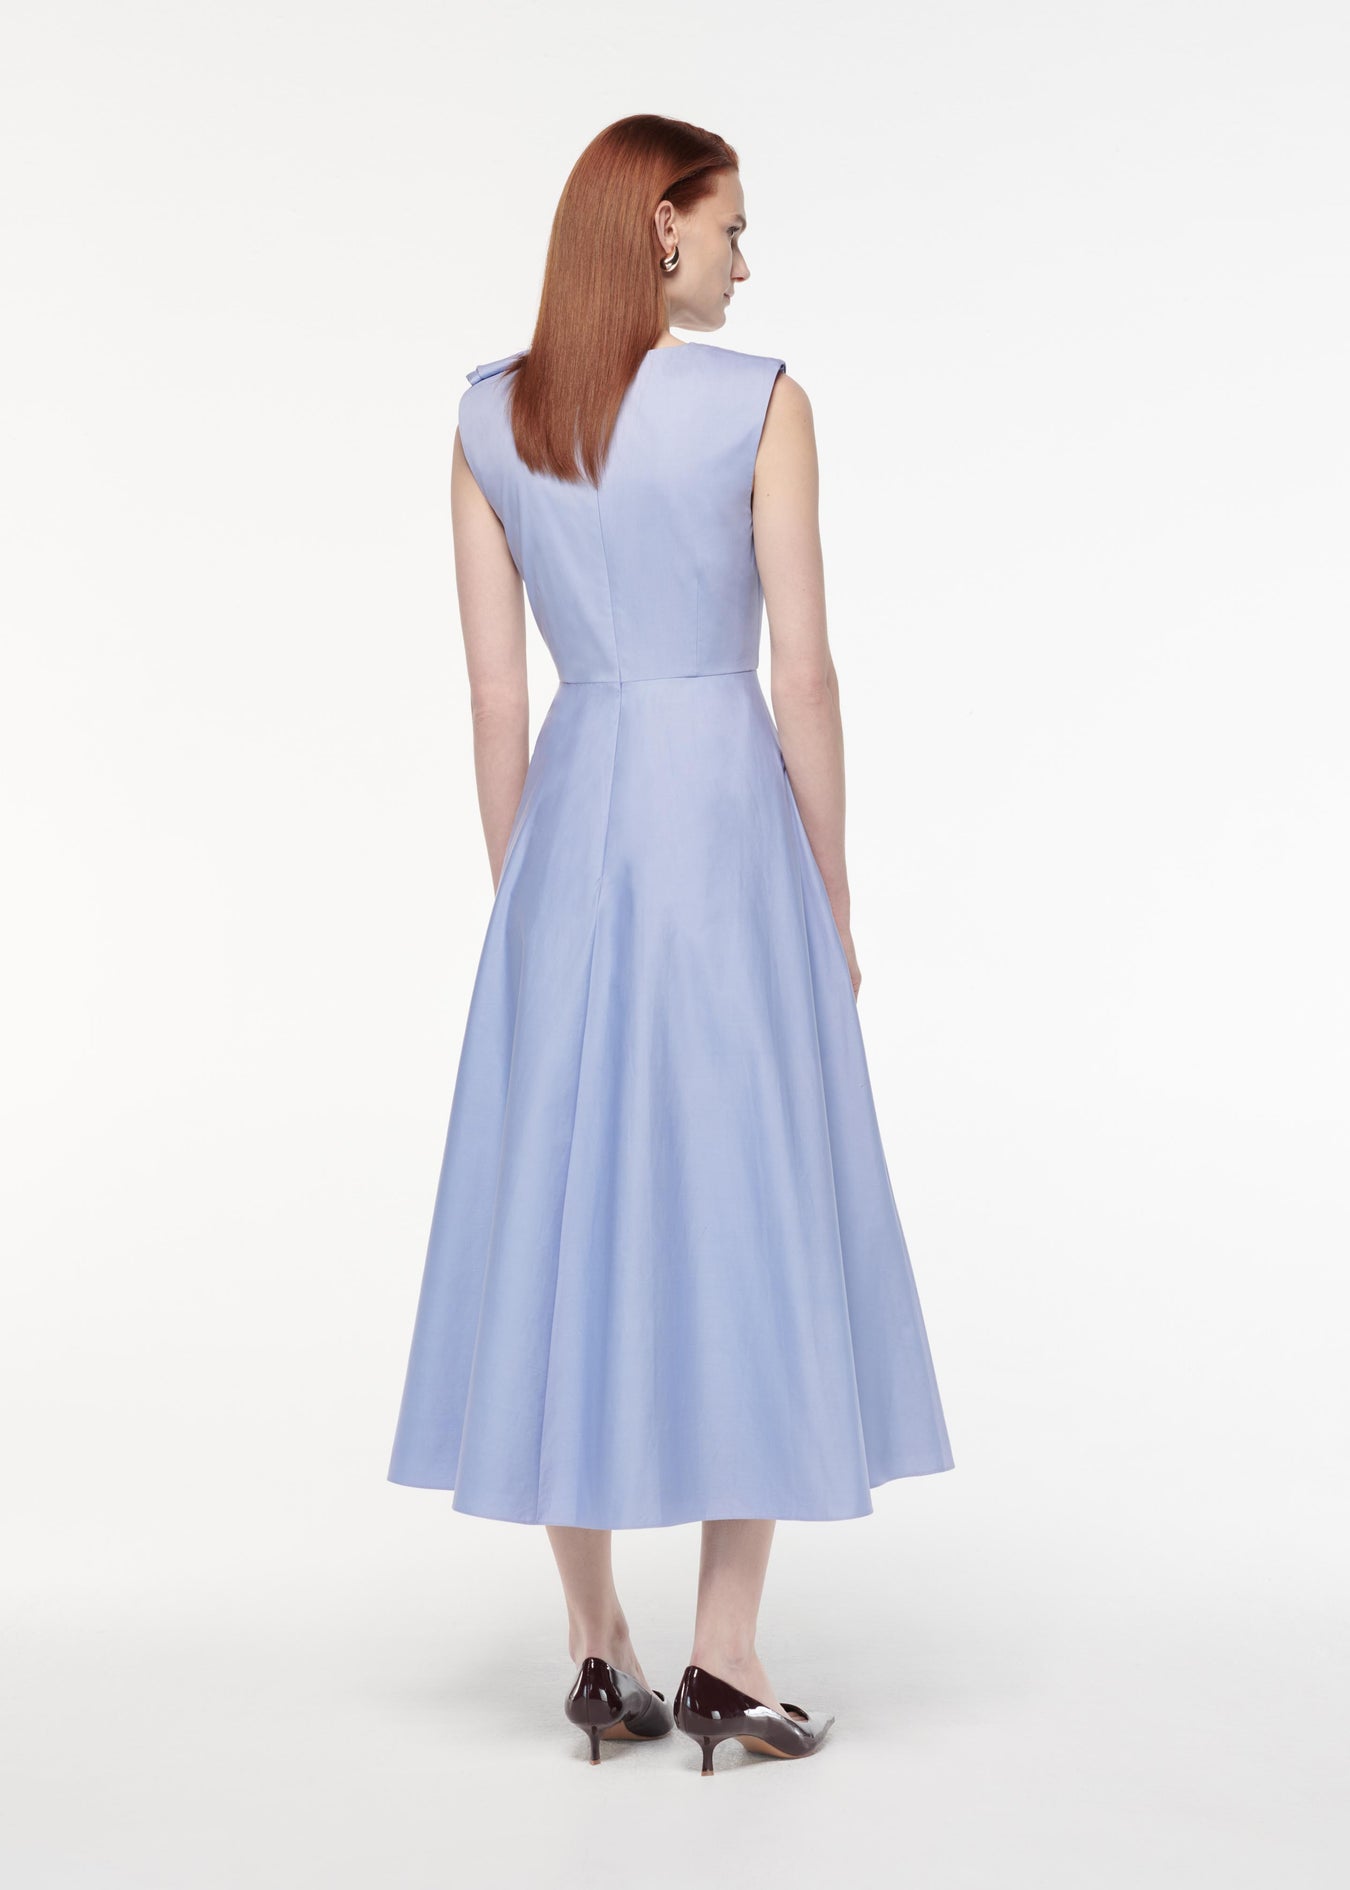 A photograph of a woman wearing aBow Cotton Poplin Midi Dress in Blue